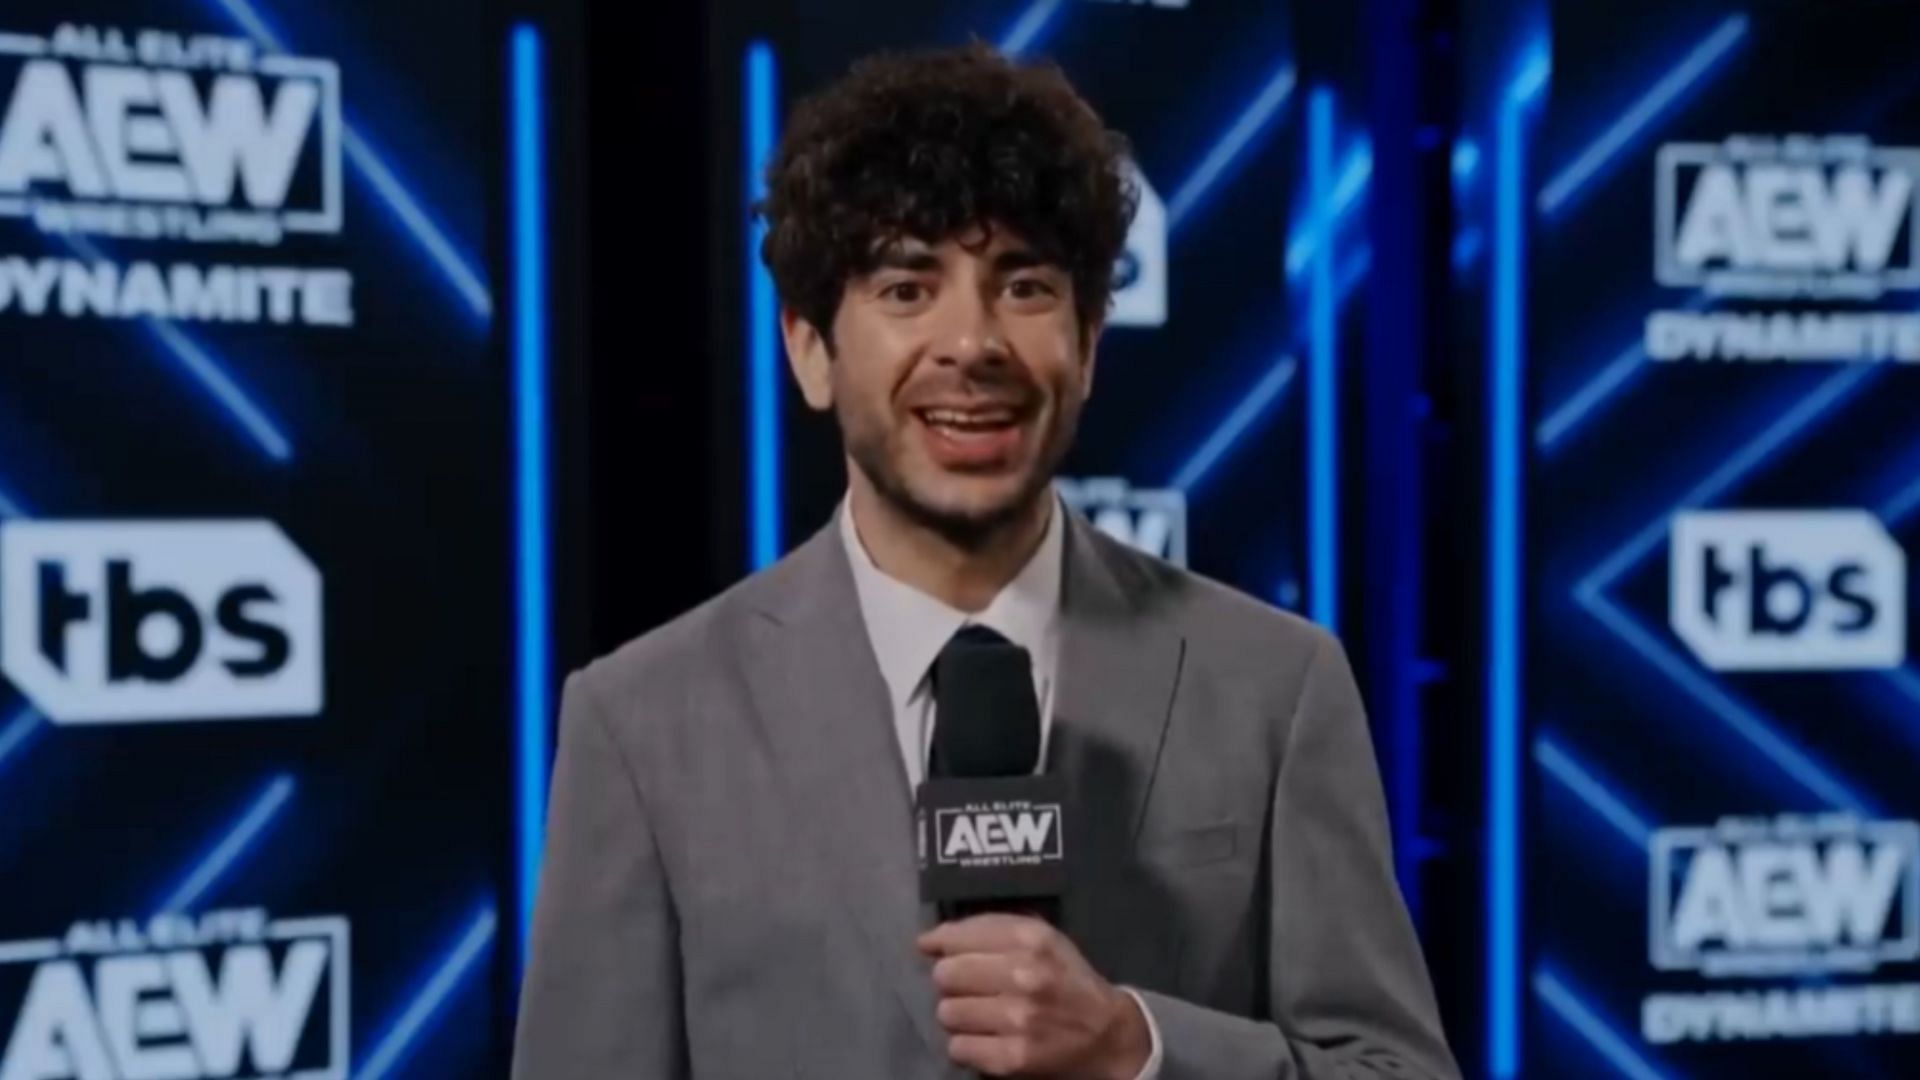 Tony Khan is the CEO of AEW and Ring of Honor